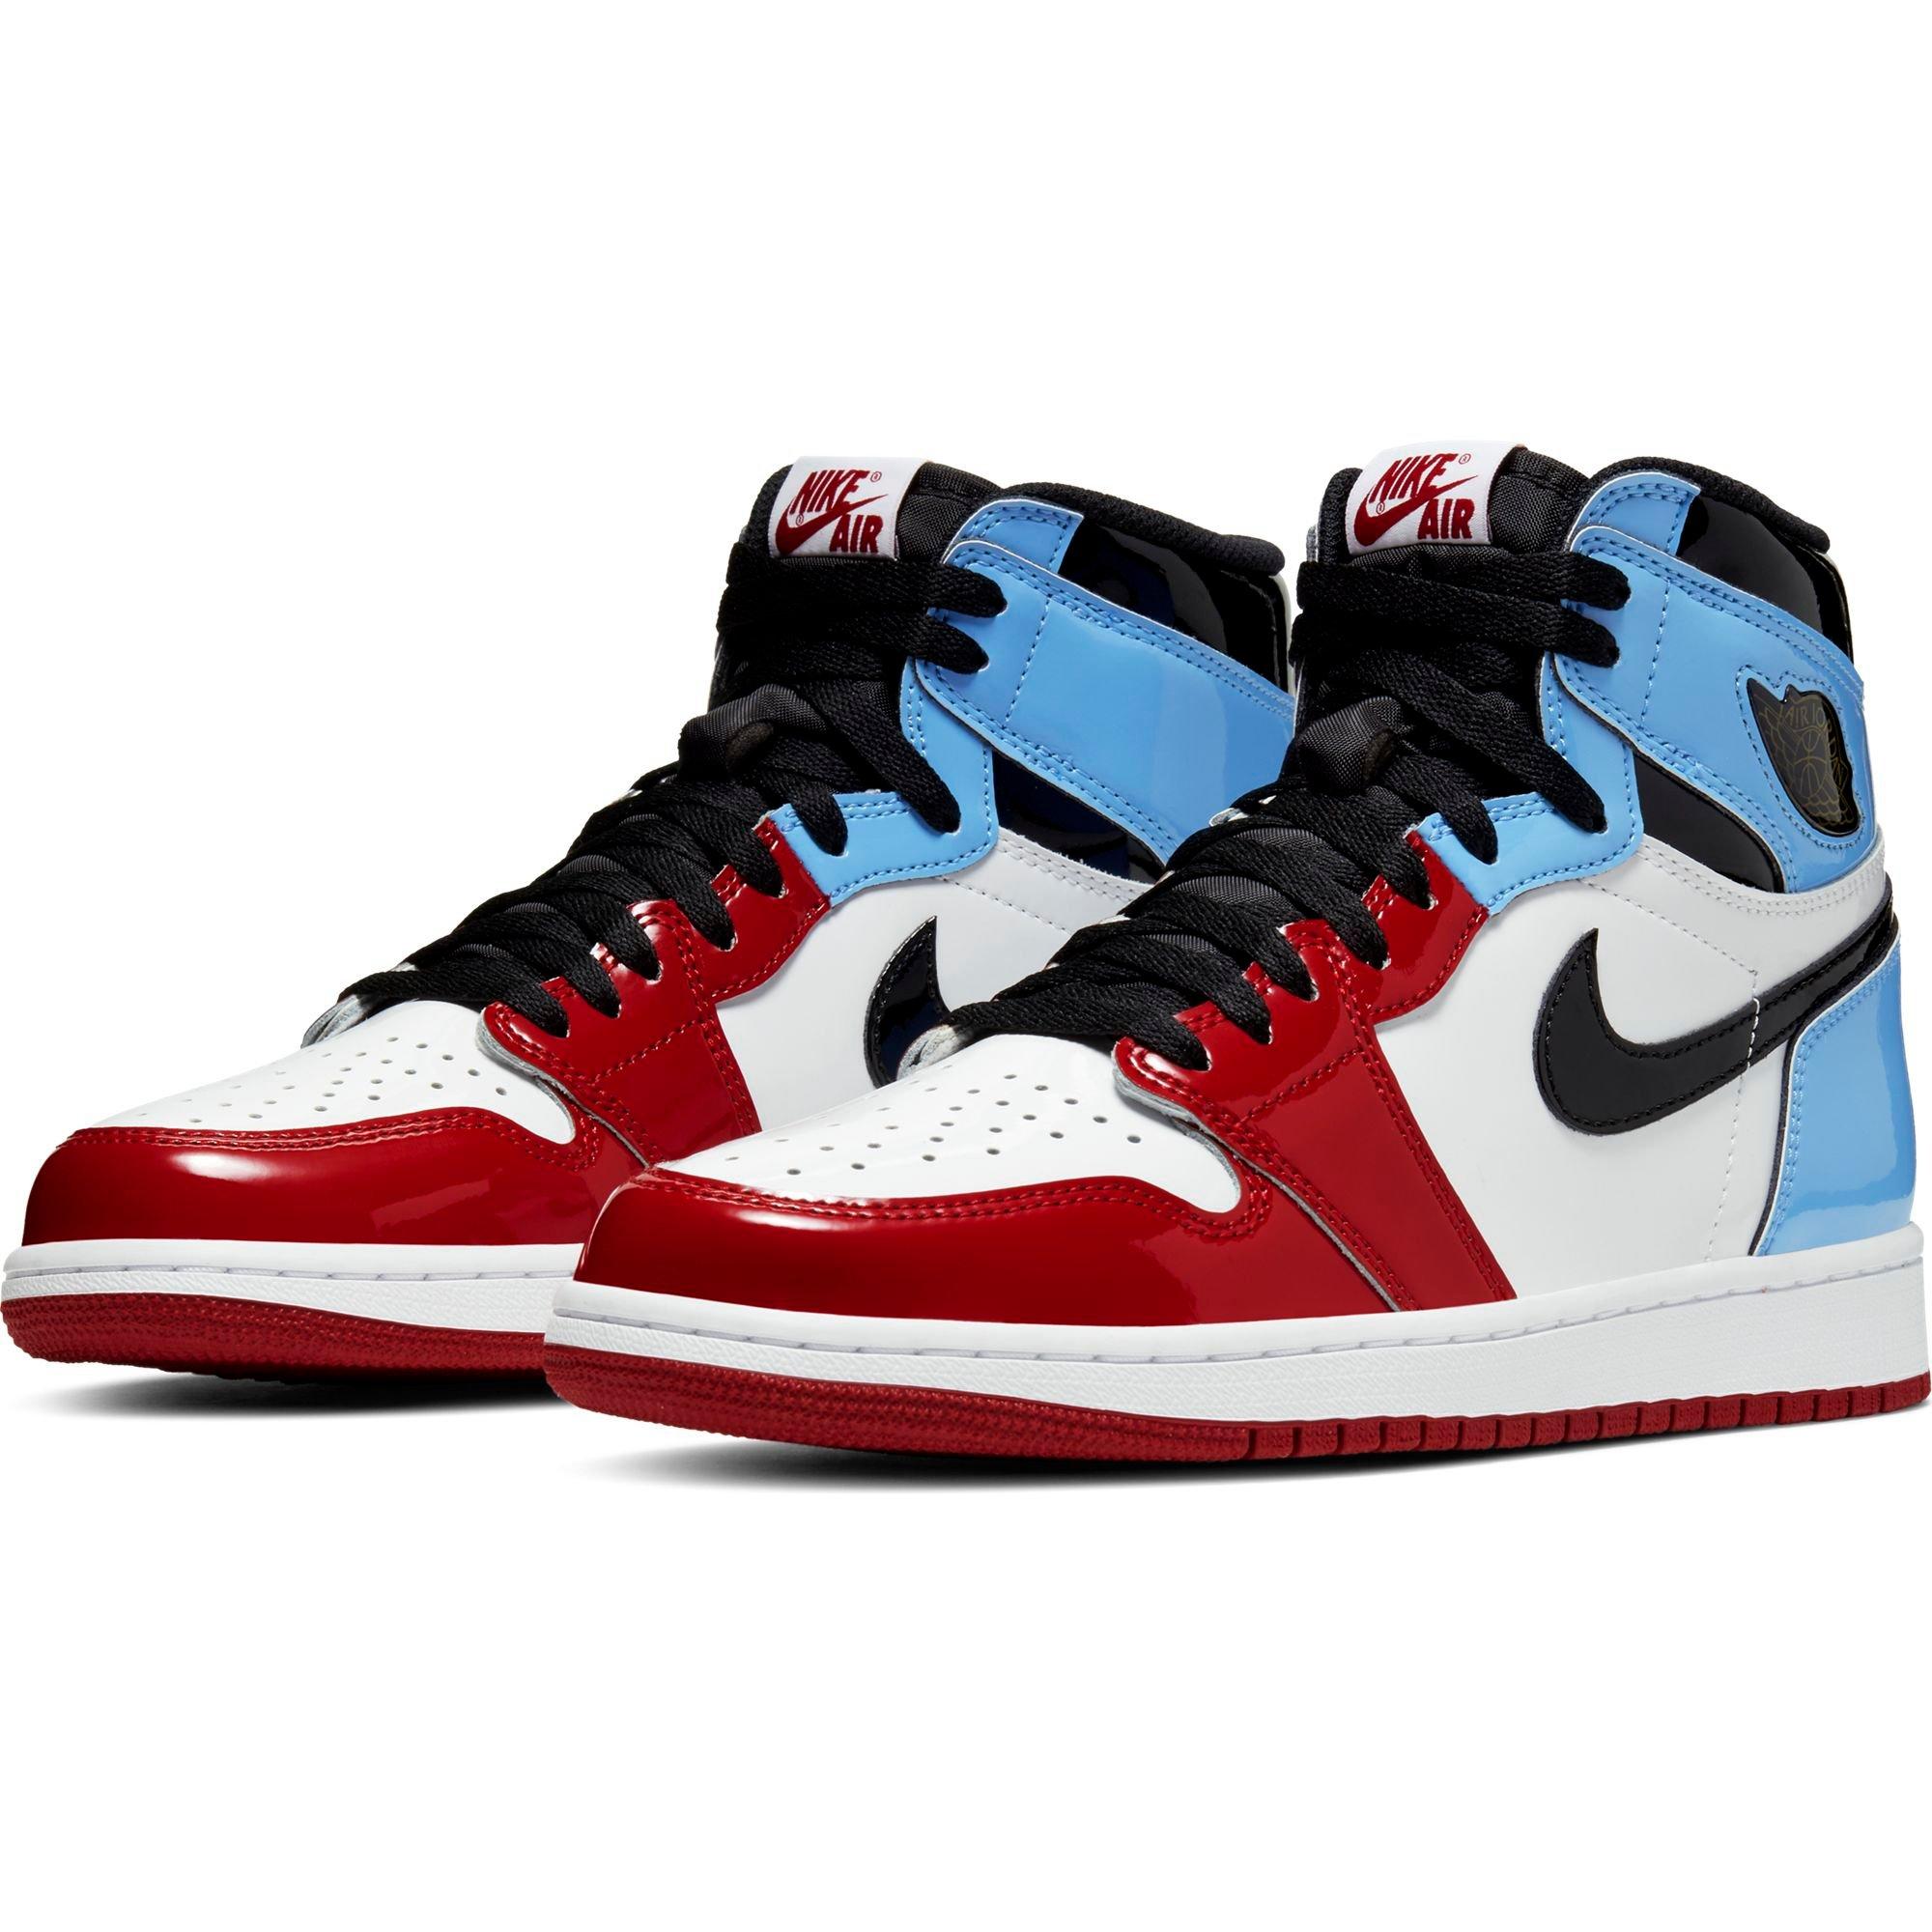 red blue ones